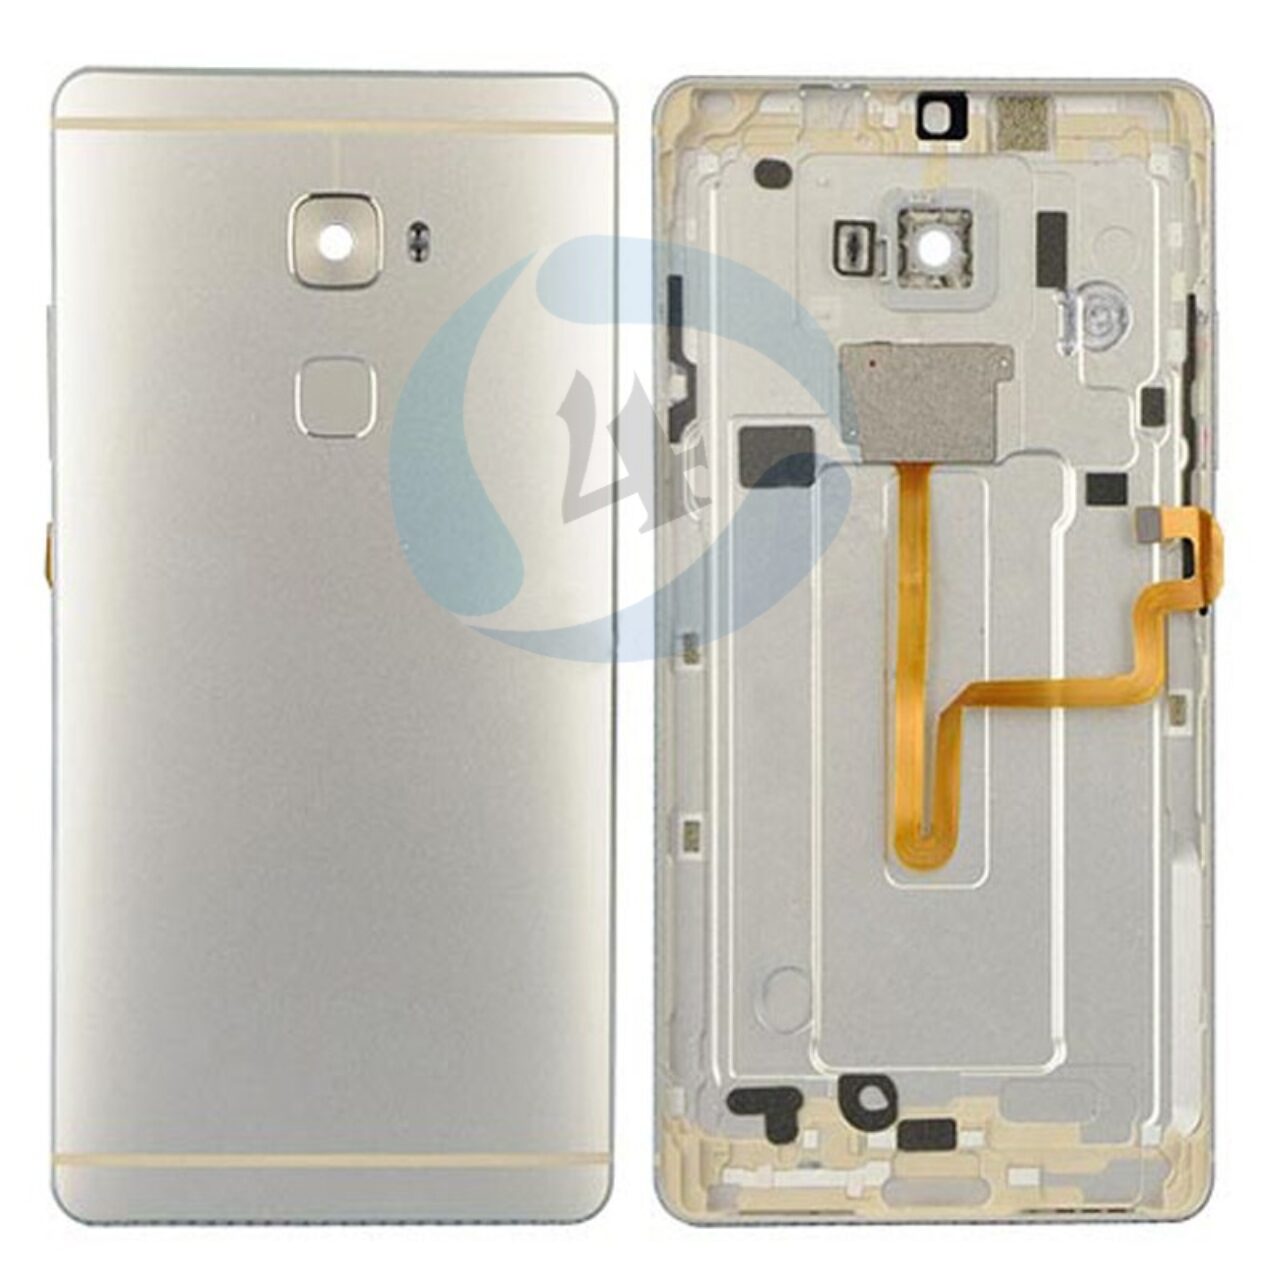 HUAWEI Mate S backcover champagne silver